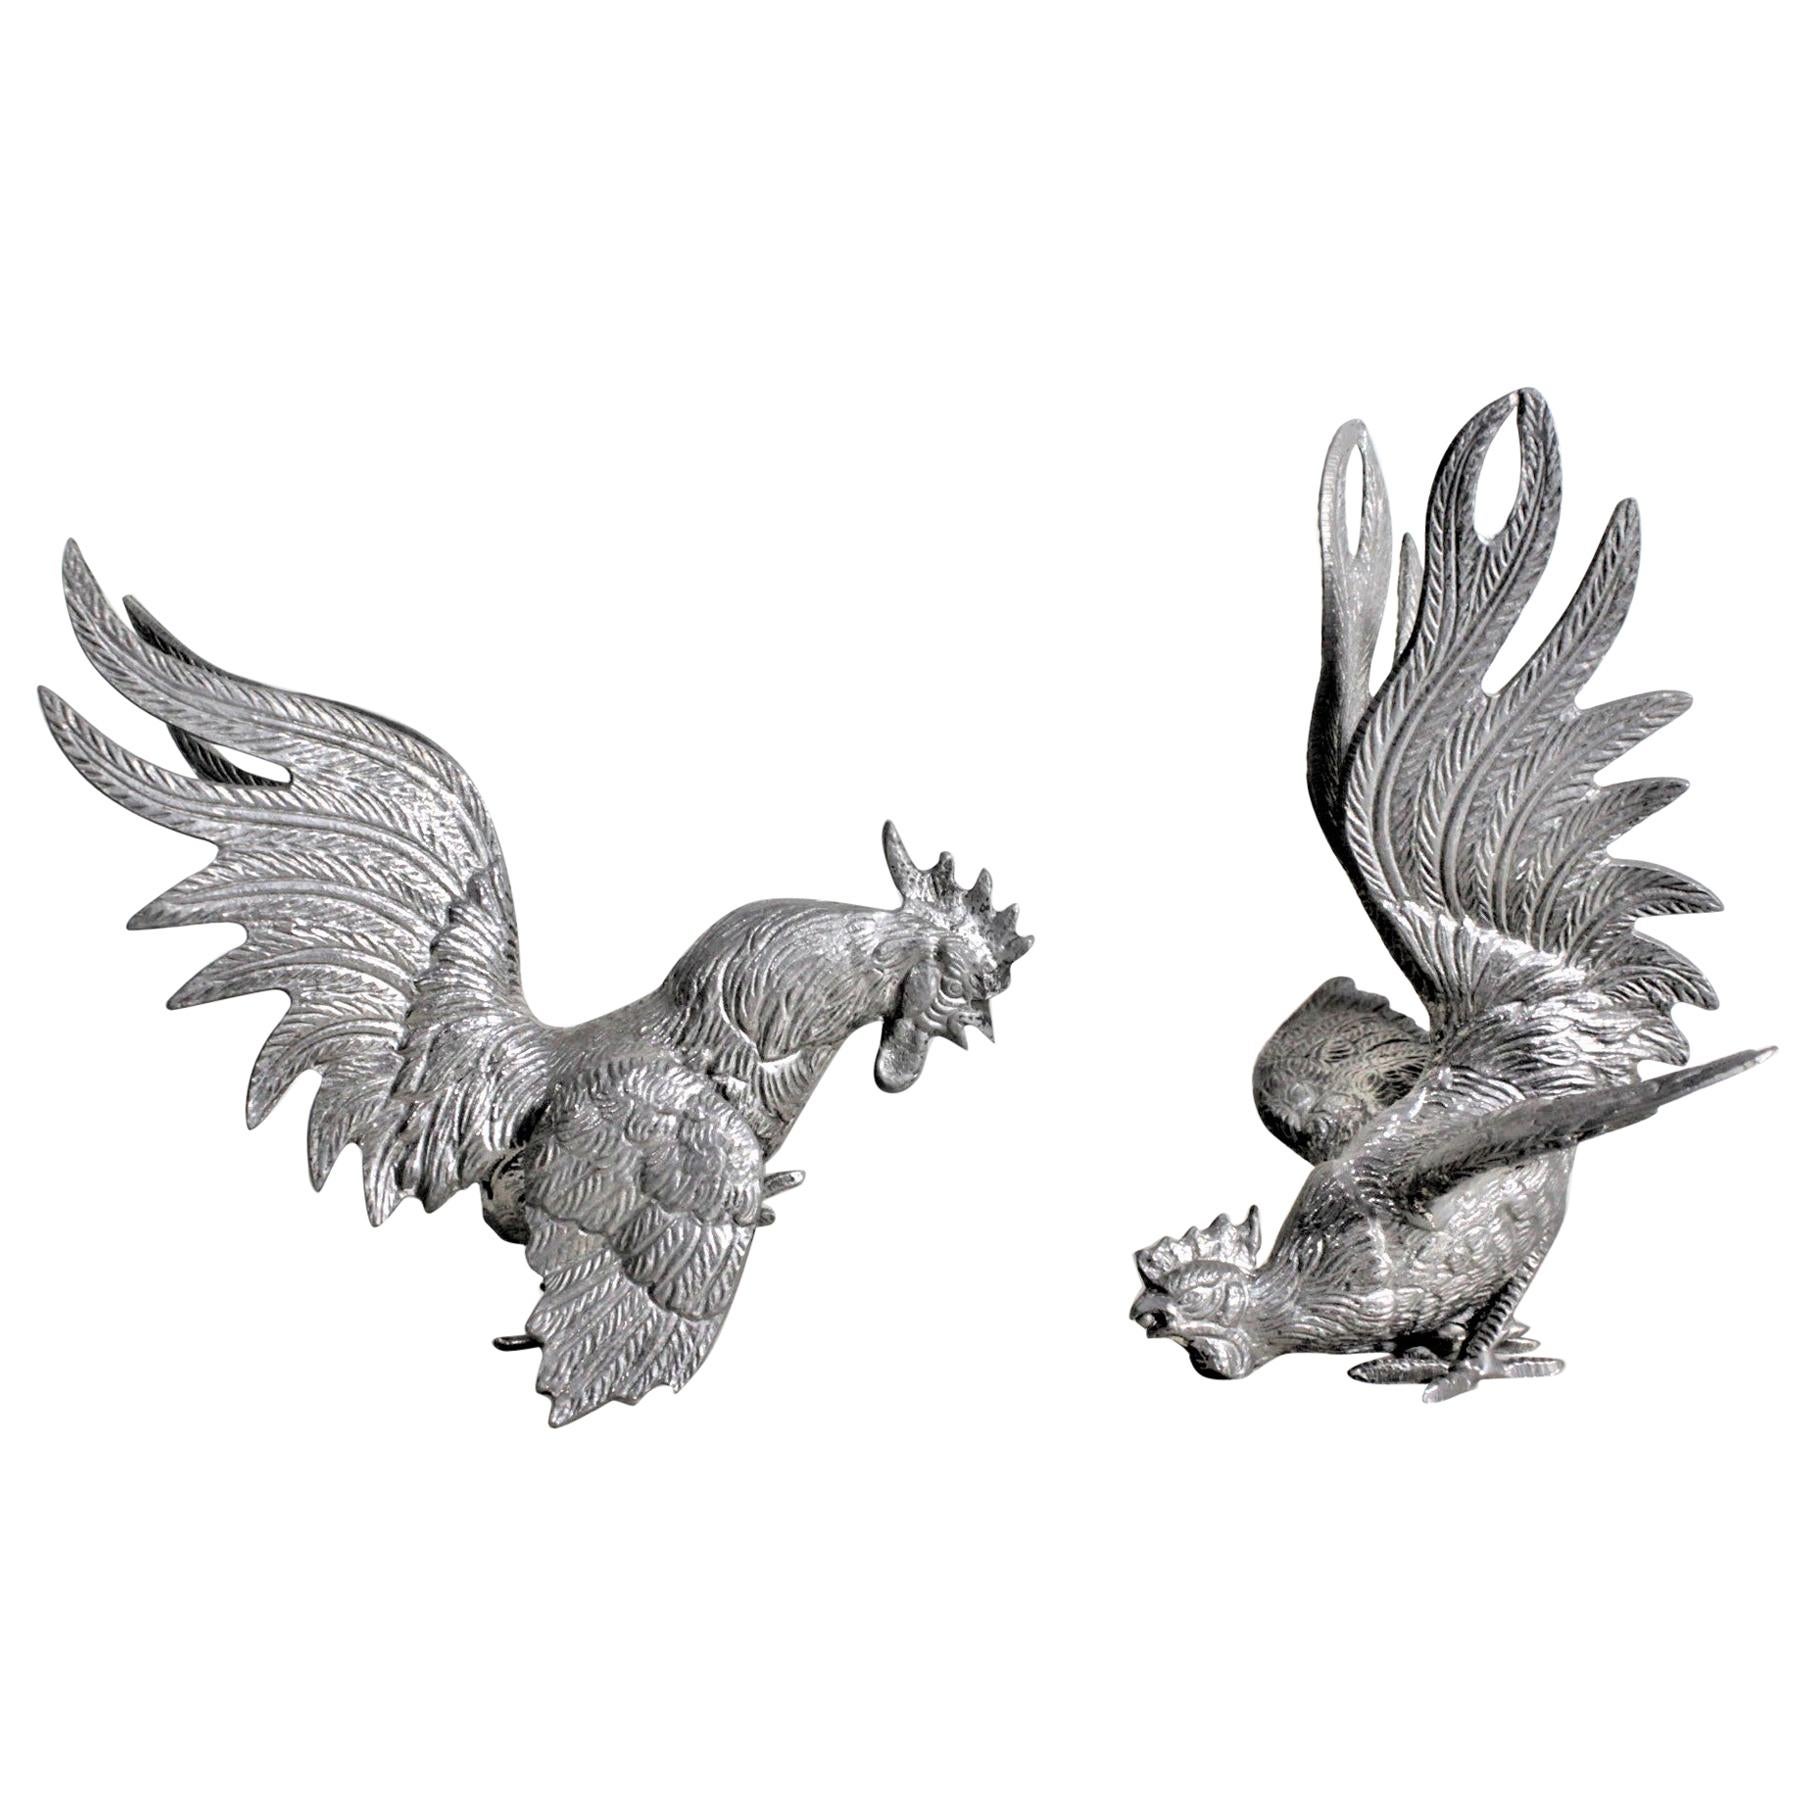 Pair of Ornate Silver Plated Fighting Rooster or Cockerel Table Sculptures